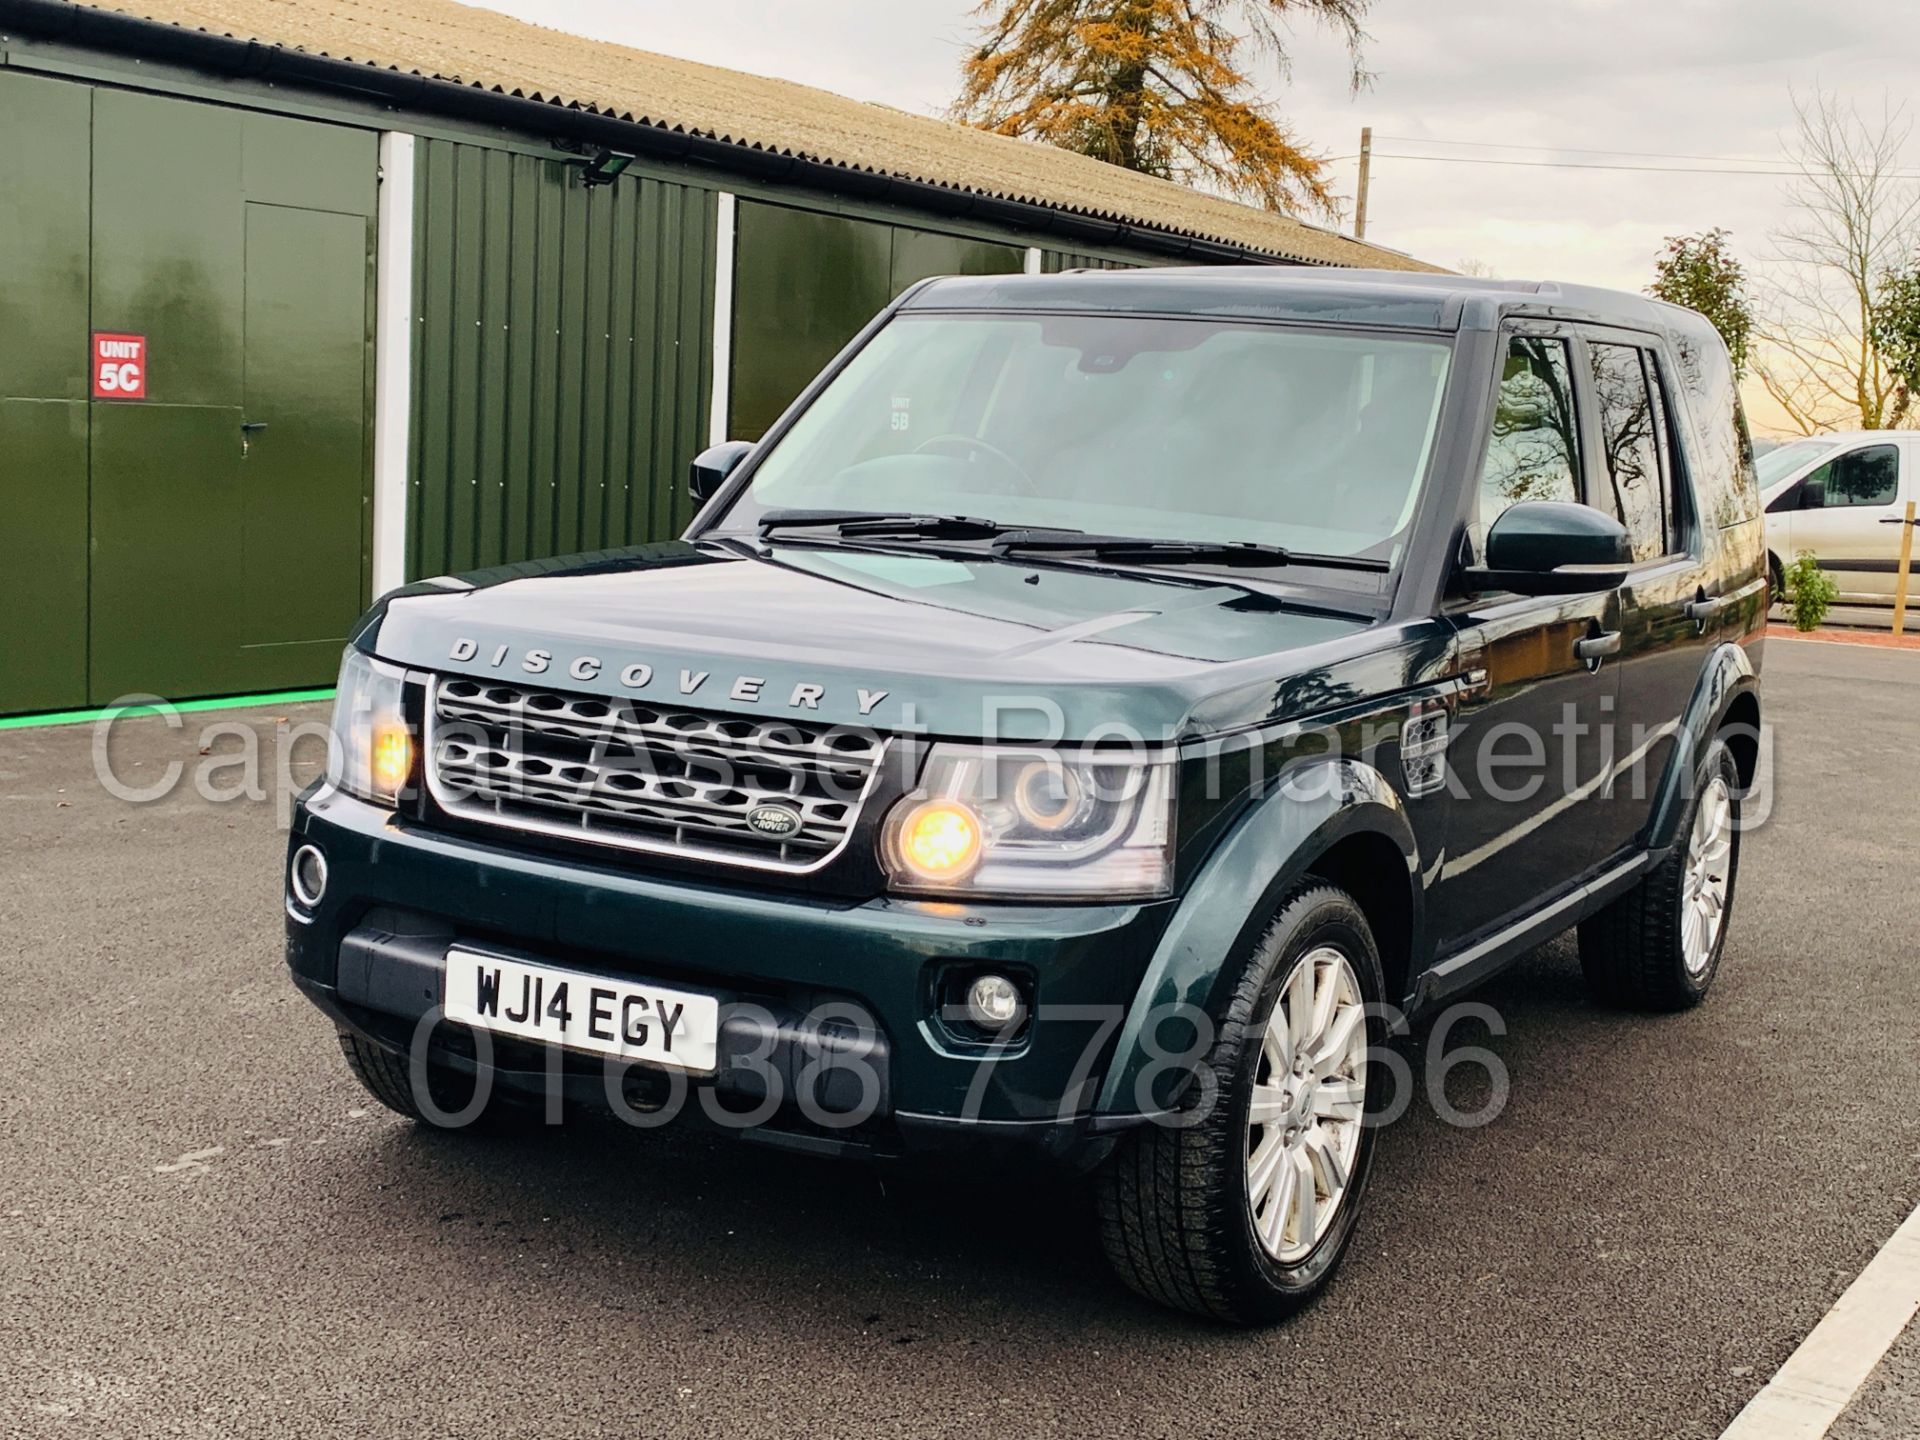 LAND ROVER DISCOVERY 4 *XS EDITION* UTILITY COMMERCIAL (2014) '3.0 SDV6 - 8 SPEED AUTO' *TOP SPEC* - Image 2 of 49